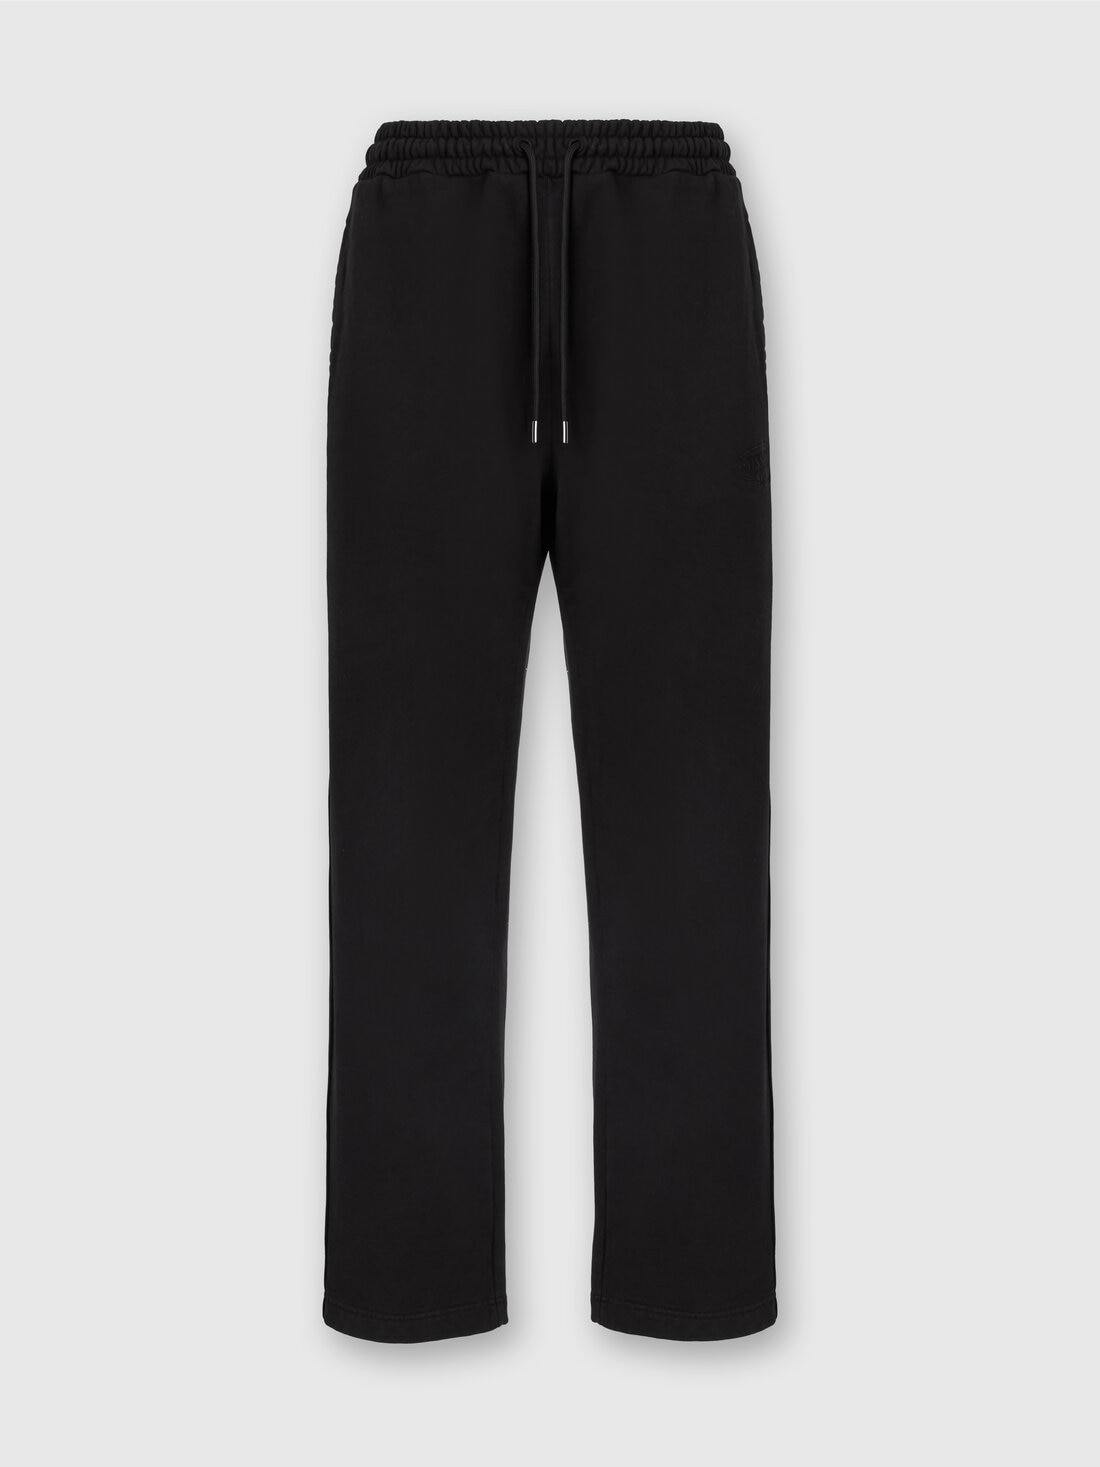 Trousers in cotton fleece with logo, Black    - TS24SI00BJ00H0S91J4 - 0